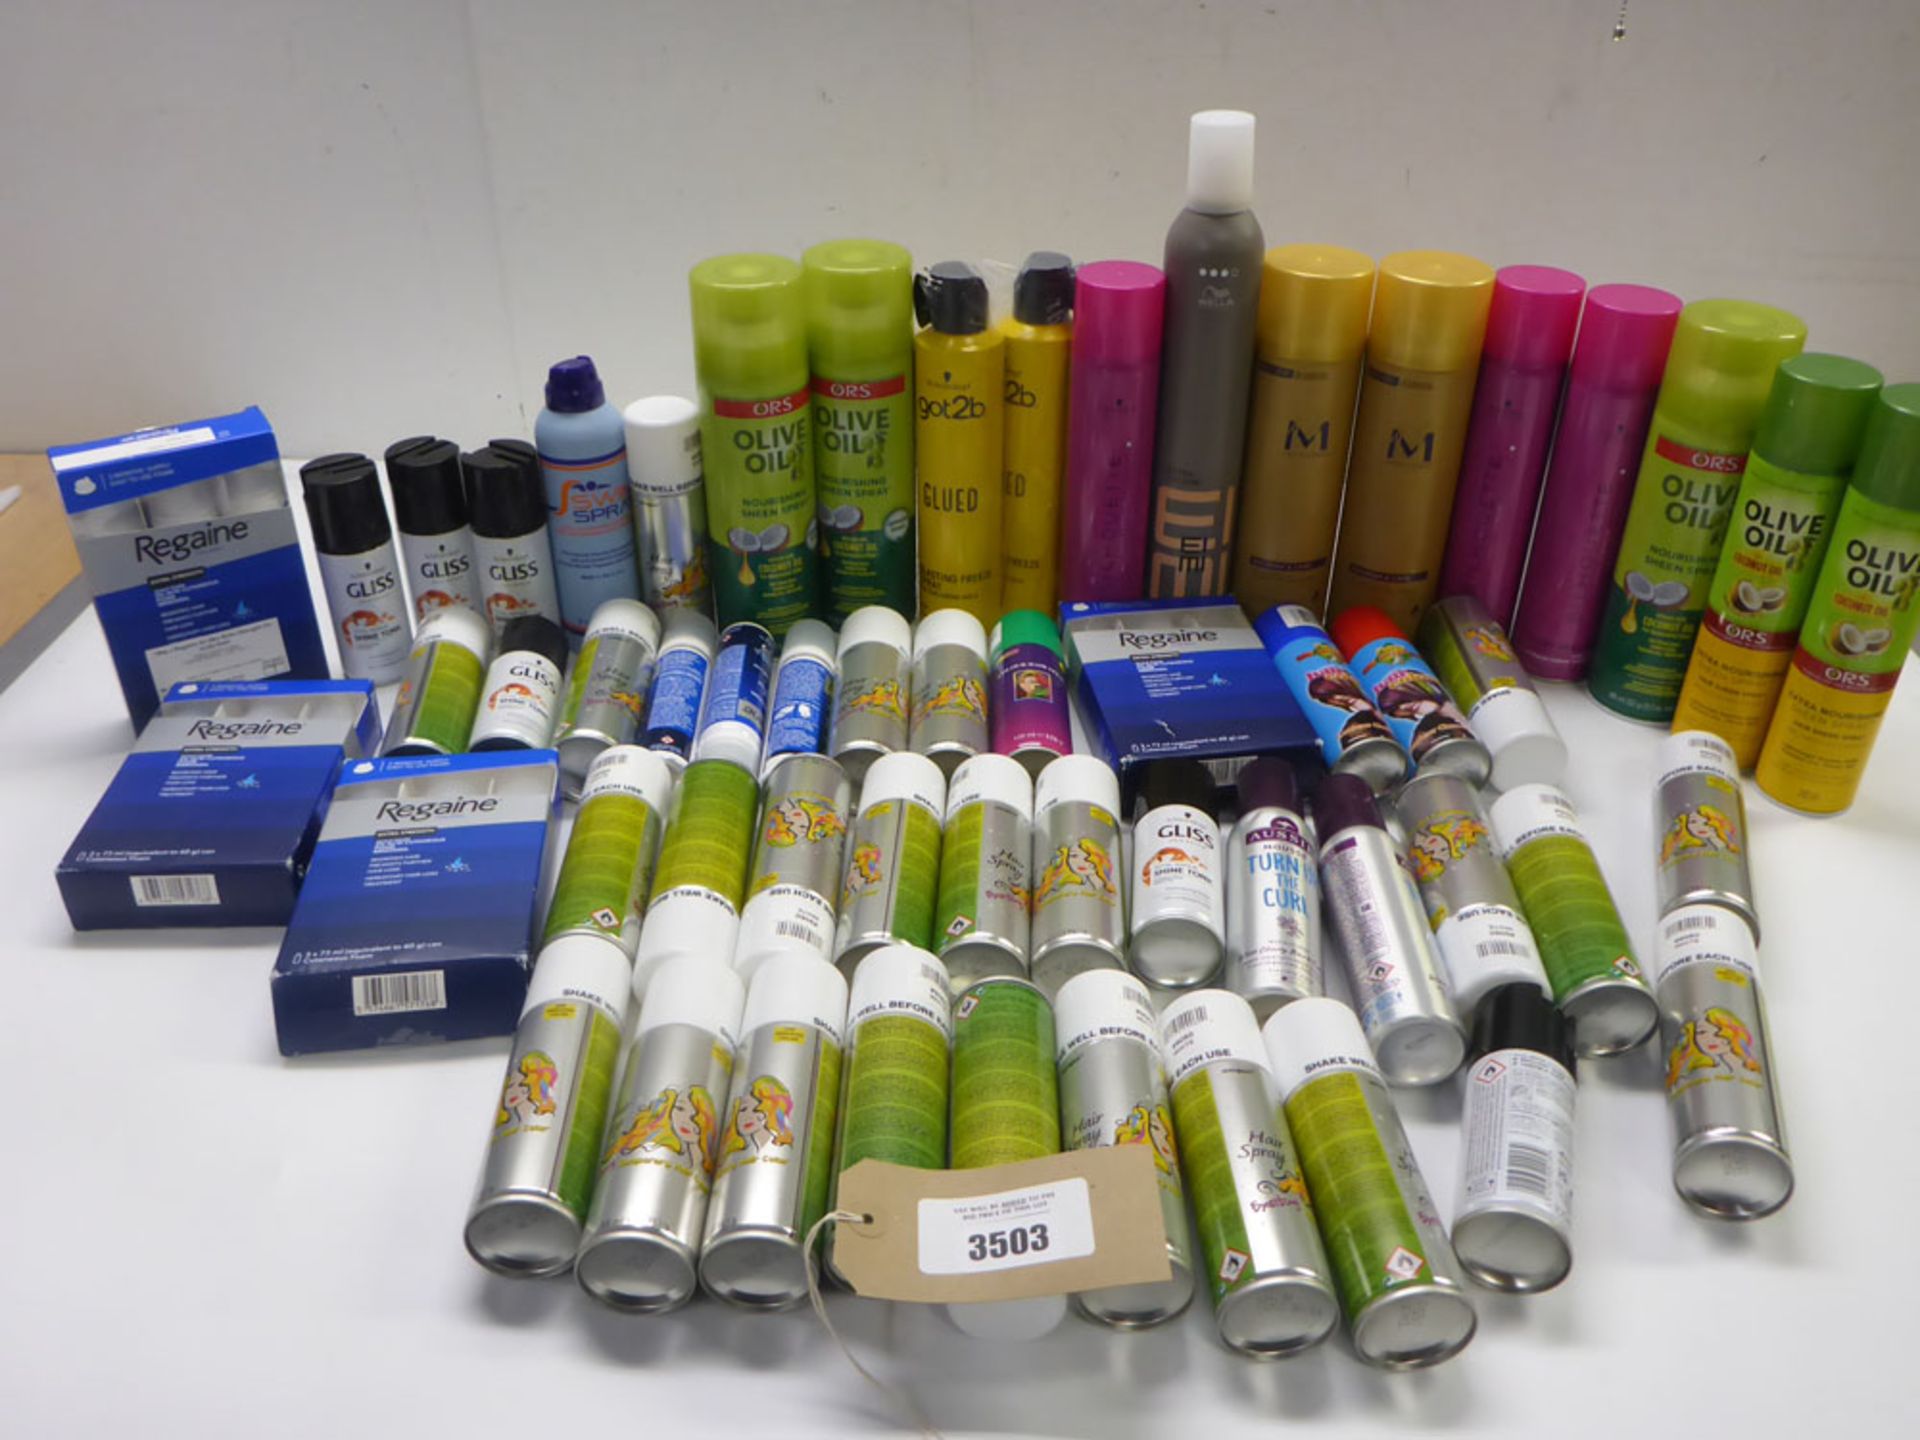 Hair products including Regaine treatments, hair spray, shine tonic, Blasting freeze, Oil sheen,